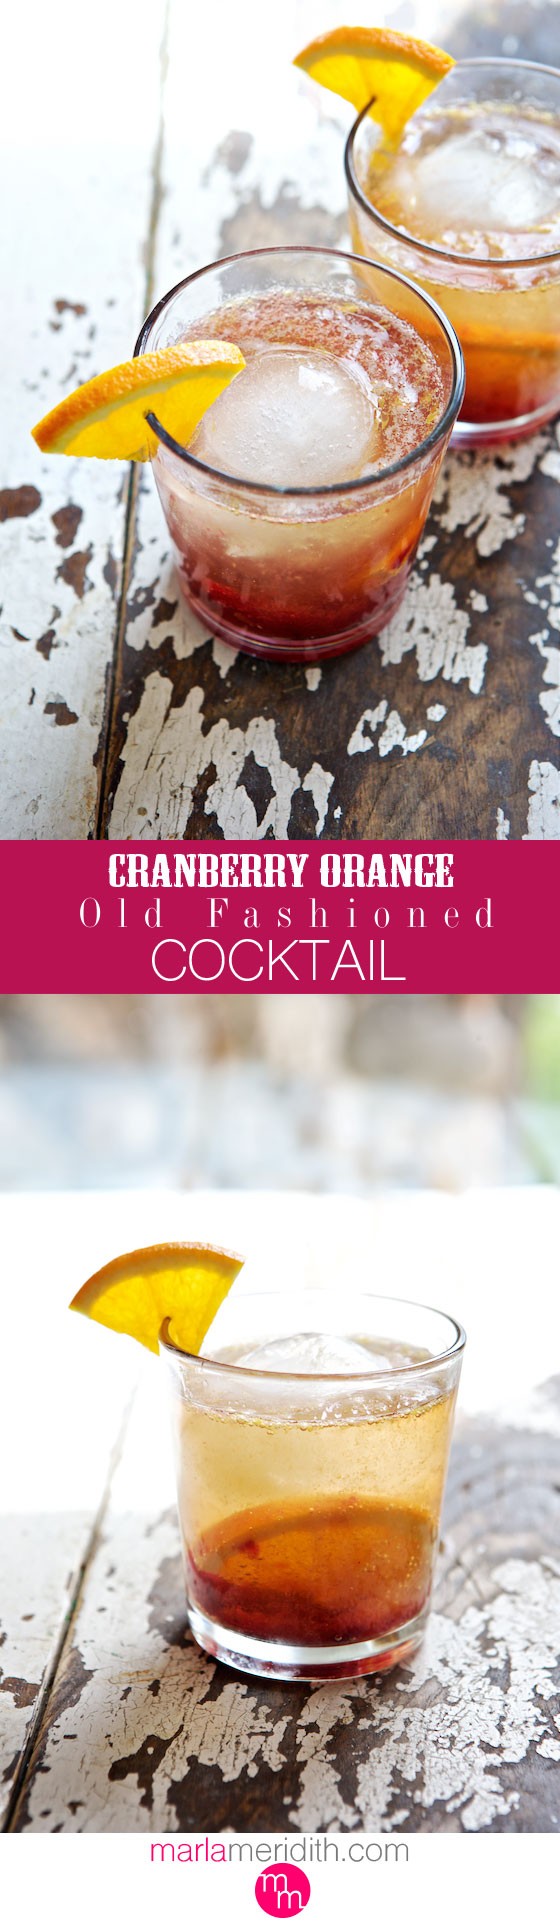 Cranberry Orange Old Fashioned Cocktail | MarlaMeridith.com ( @marlameridith )